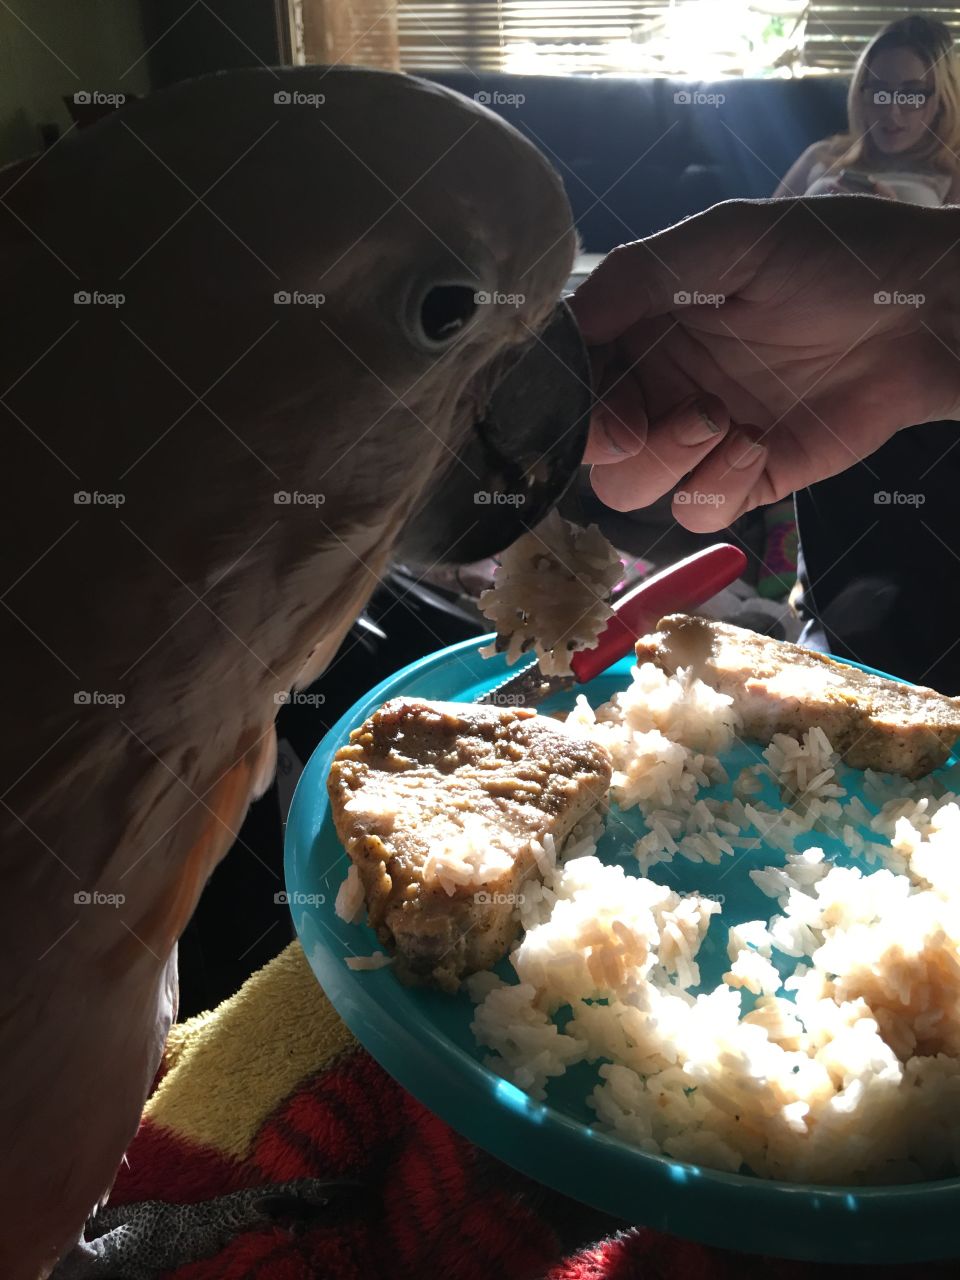 Sharing a meal 